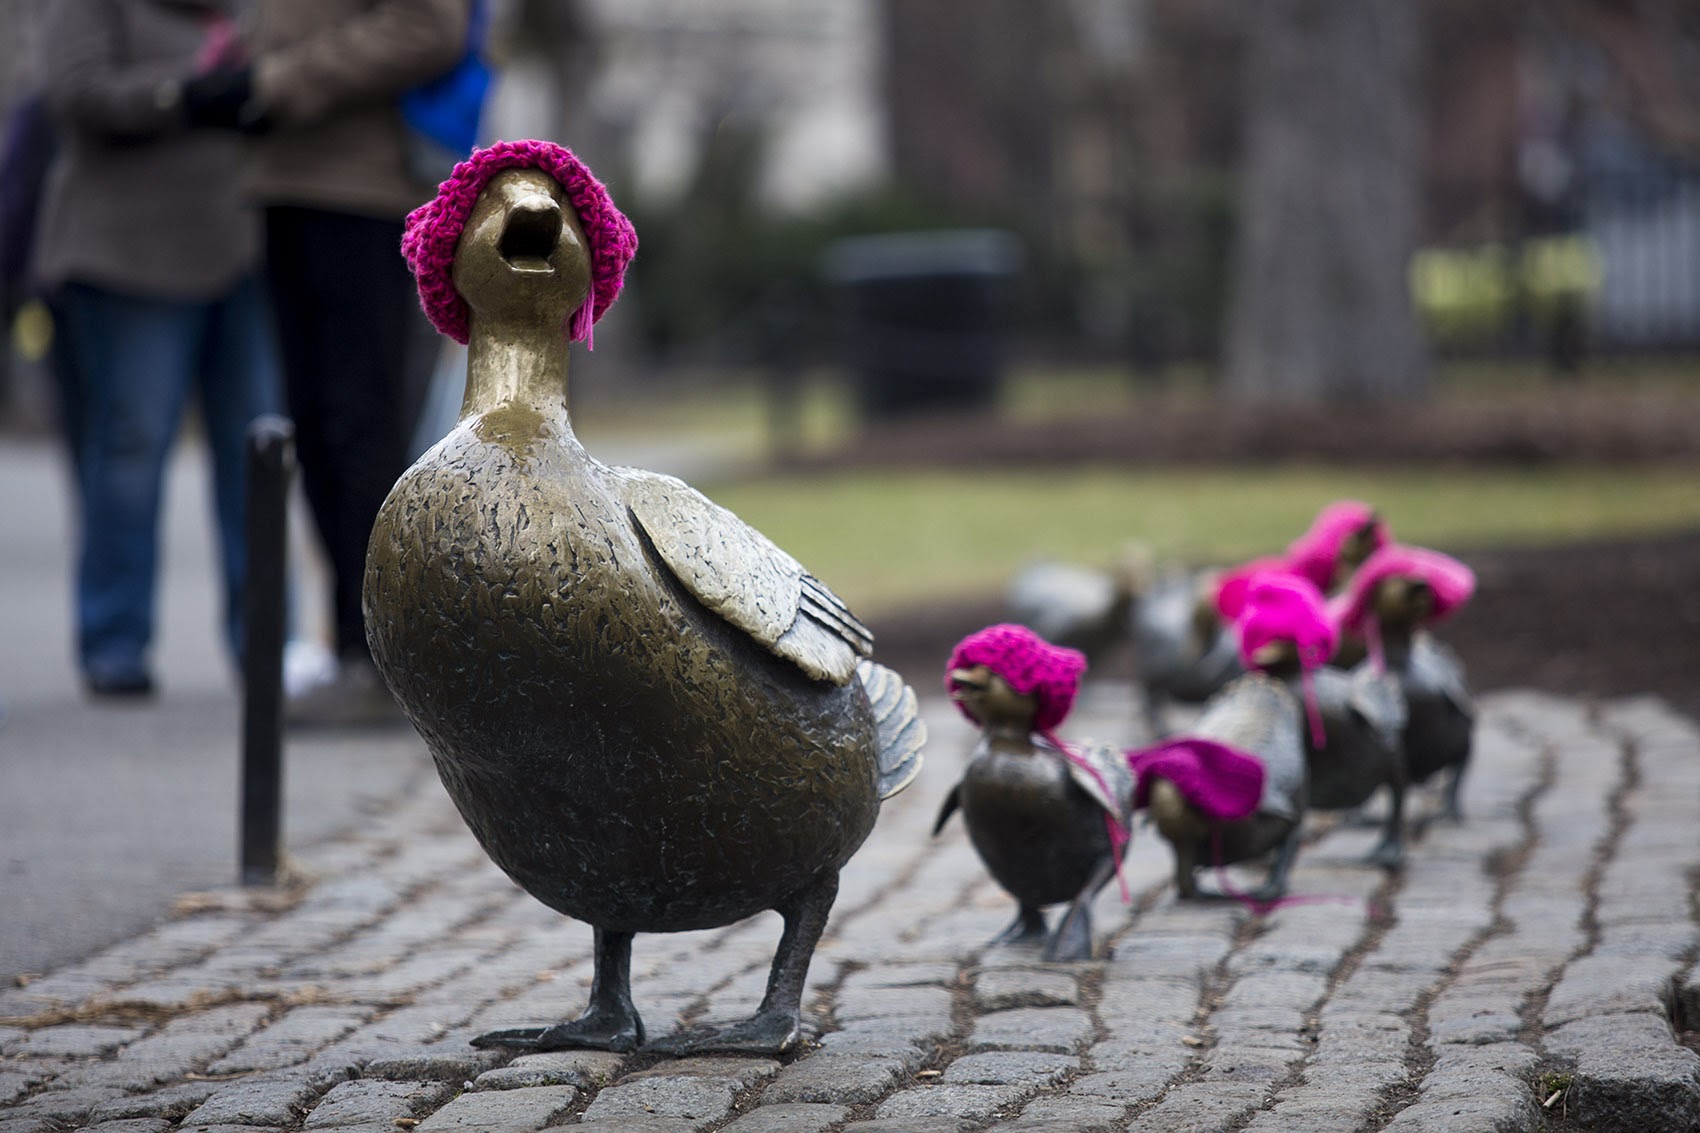 The &quot;Make Way For Ducklings&quot; sculptures wearing pink hats for the Women's March in Boston in January. (Jesse Costa/WBUR)